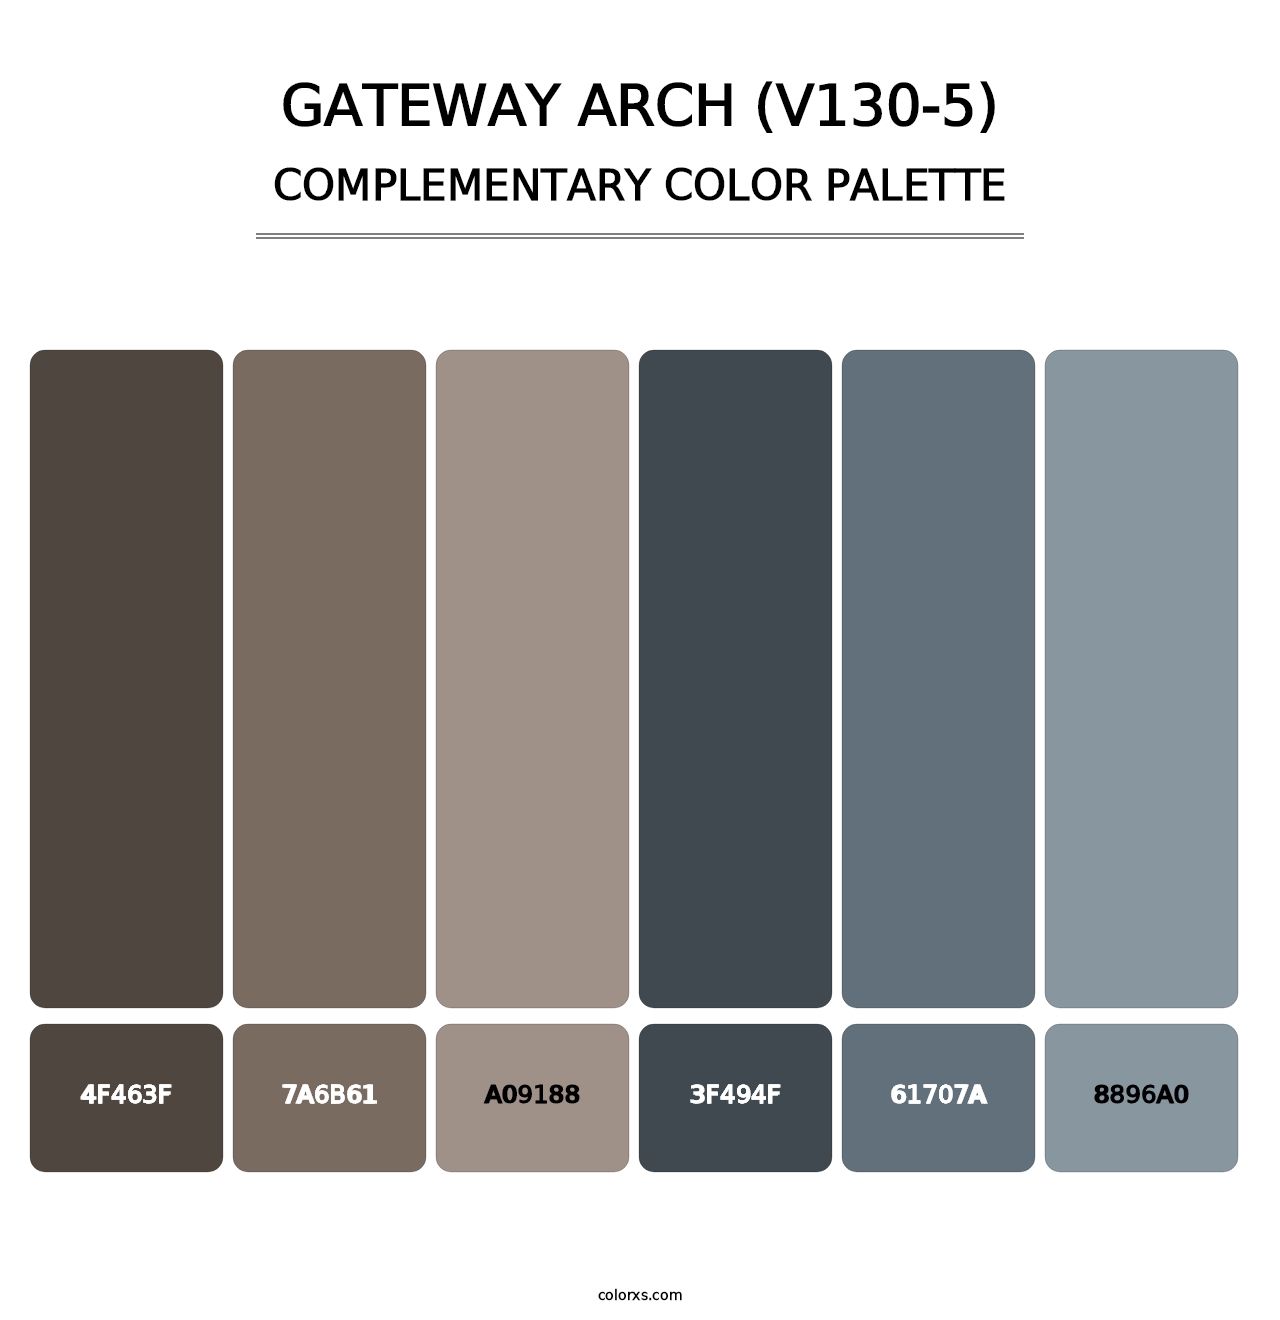 Gateway Arch (V130-5) - Complementary Color Palette